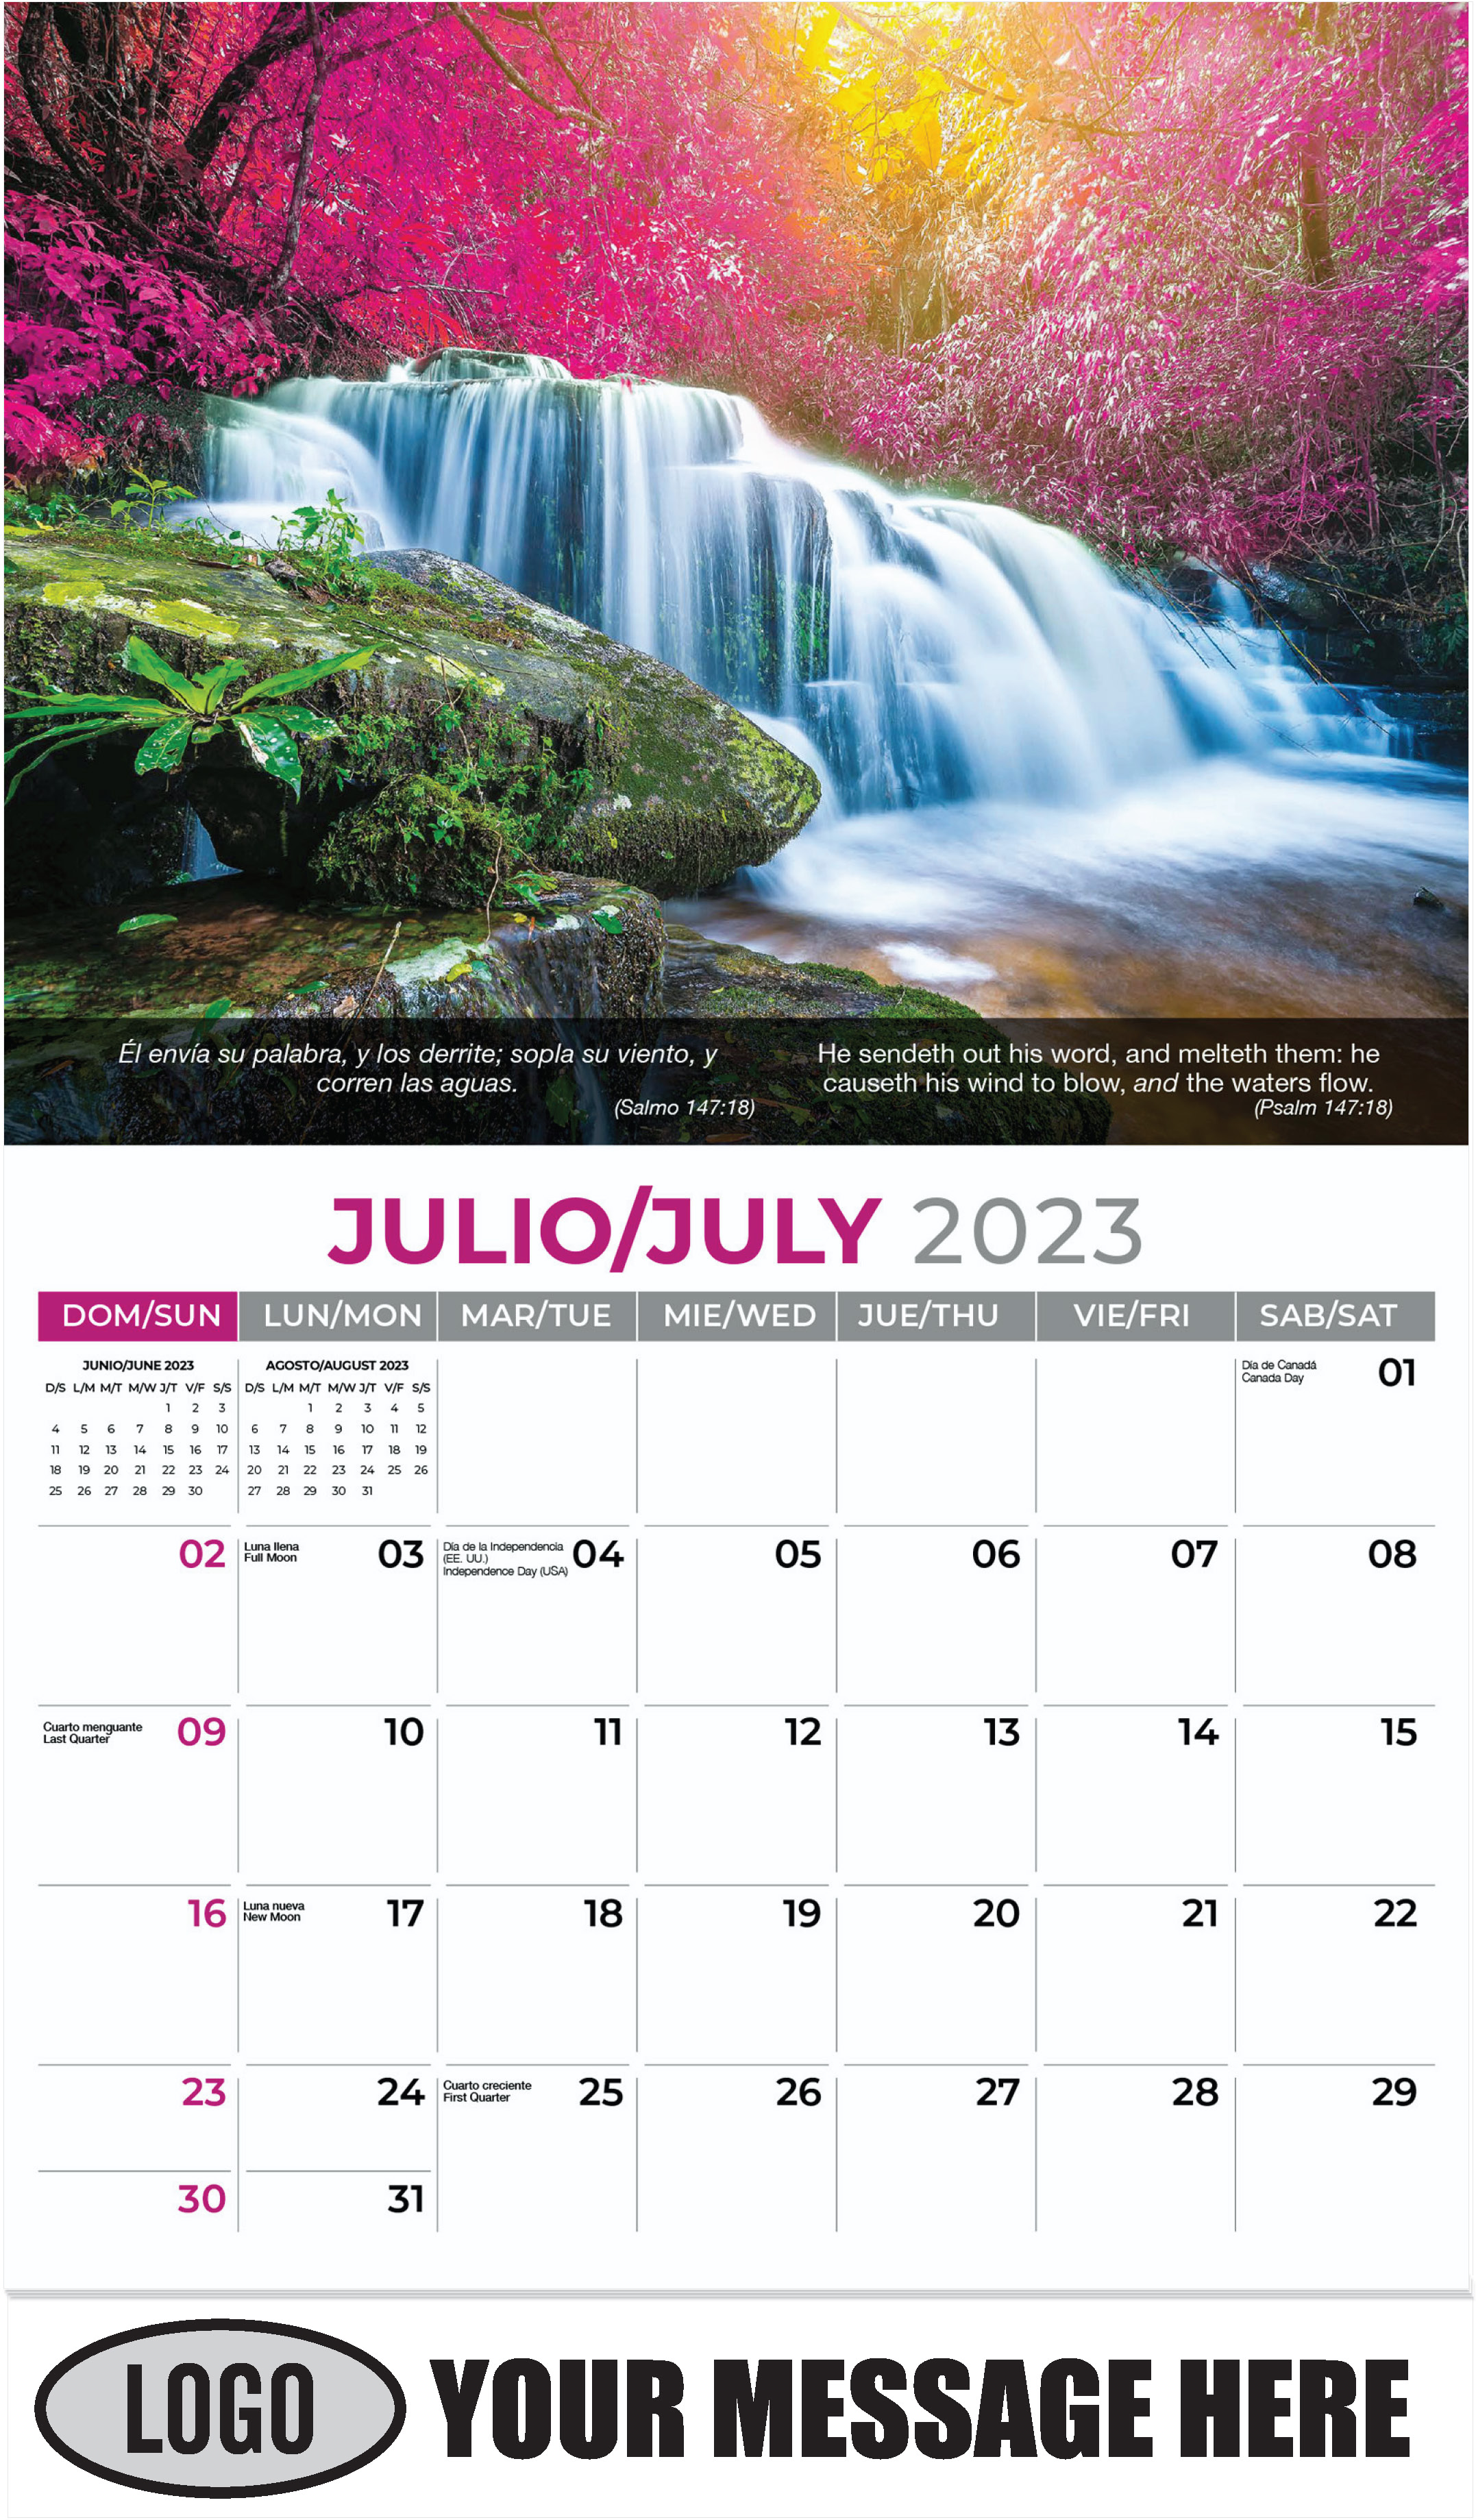 waterfall in colorful autumn forest - July - Faith-Passages-Eng-Sp 2023 Promotional Calendar